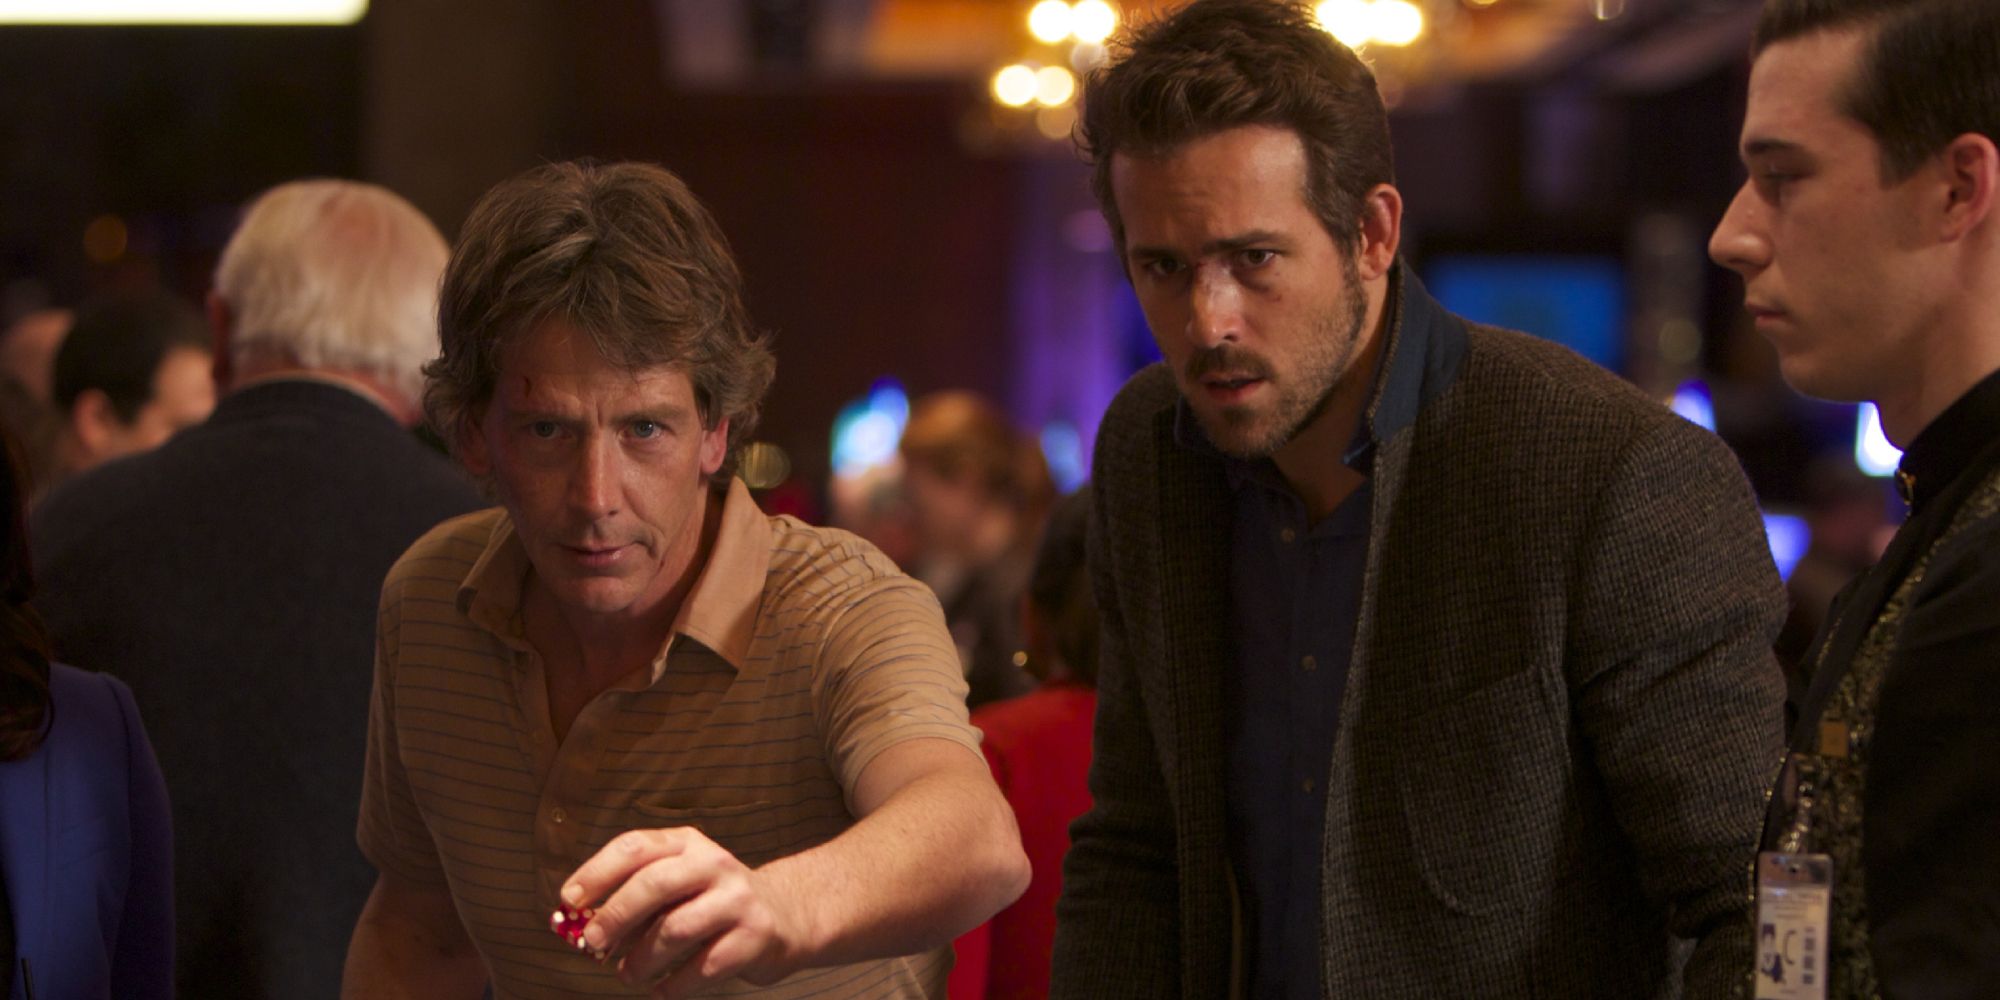 Ryan Reynolds and Ben Mendelsohn playing a game at the casino in Mississipi Grind